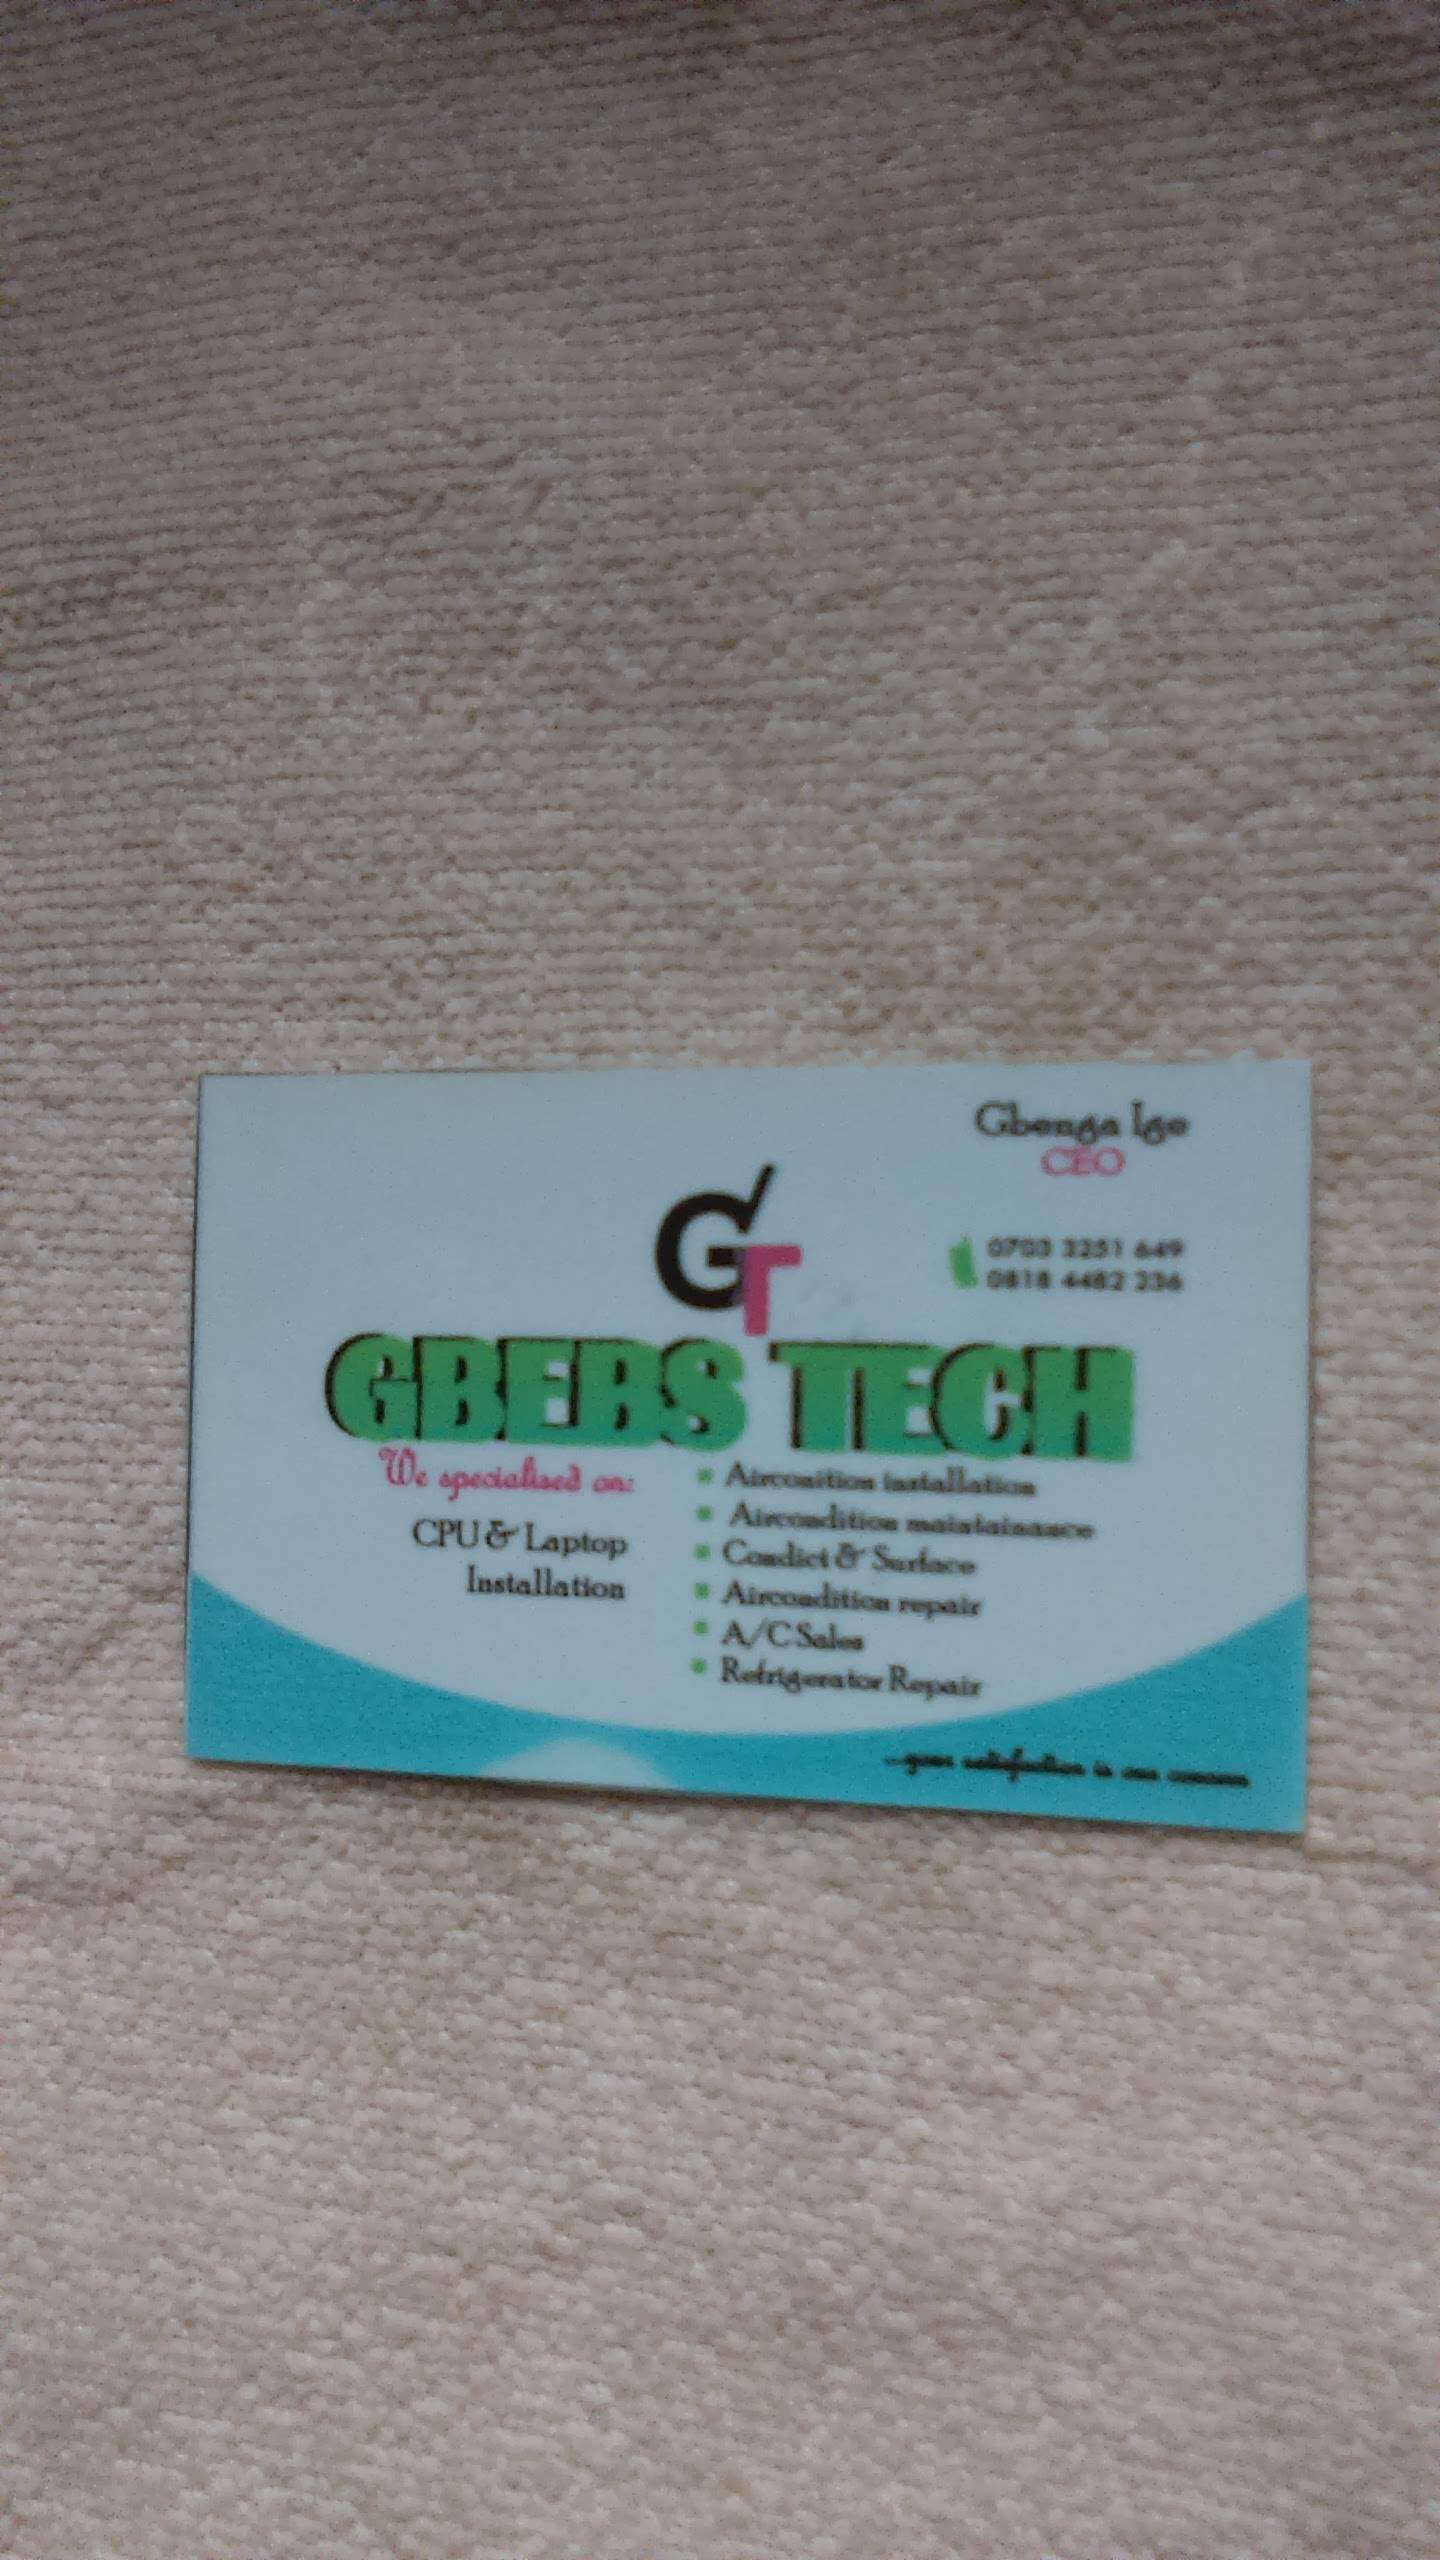 GBEBS TECH COOLING COMPANY provider